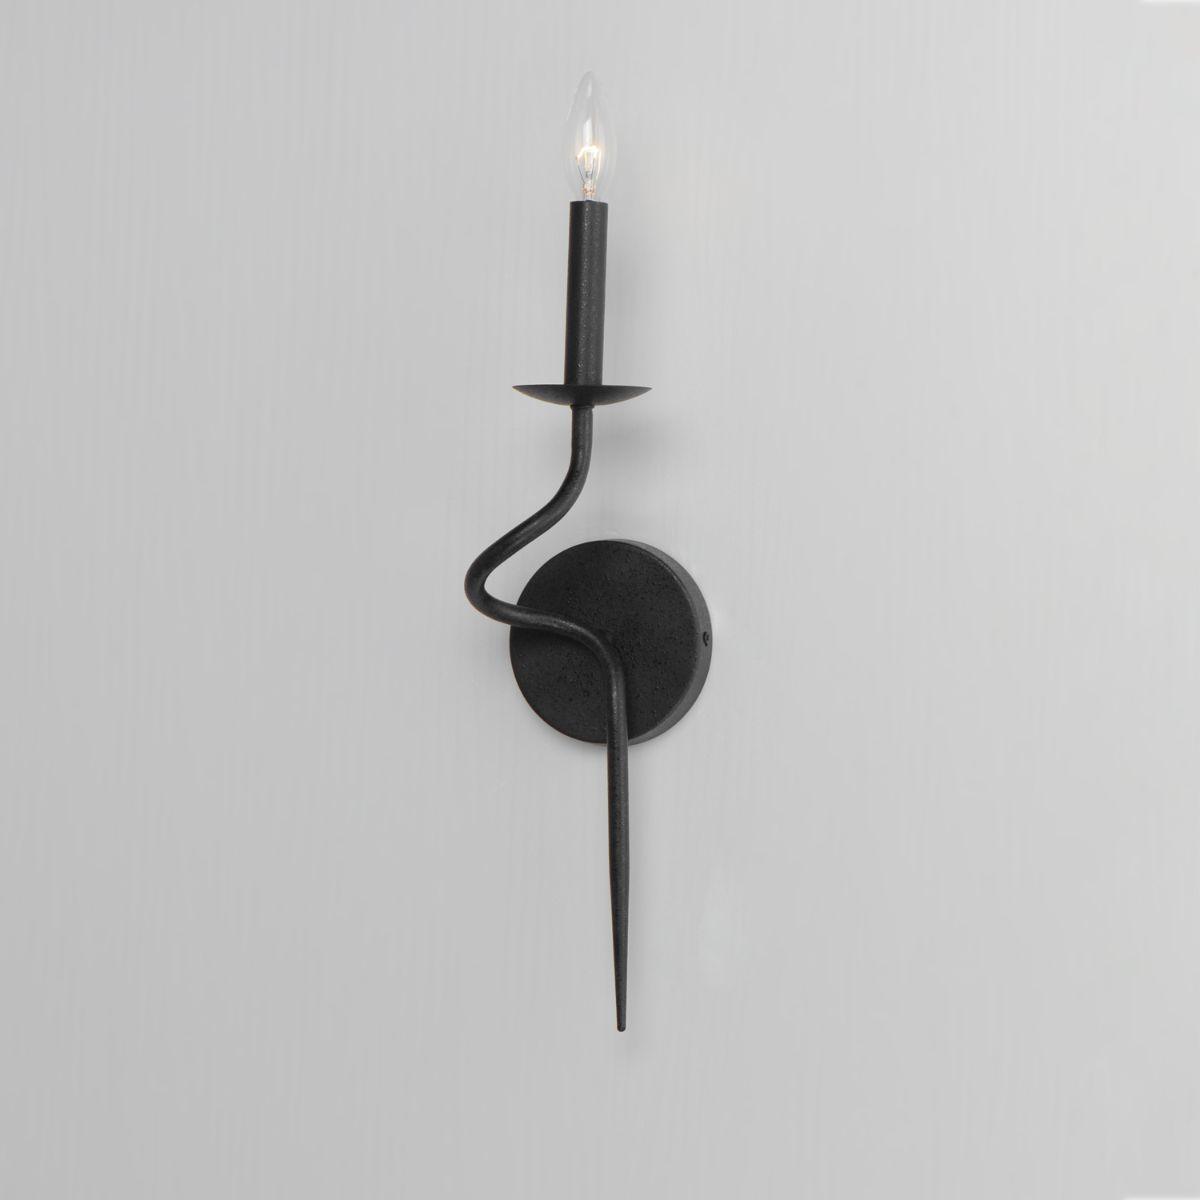 Padrona 19 in. Armed Sconce Black Oxide finish